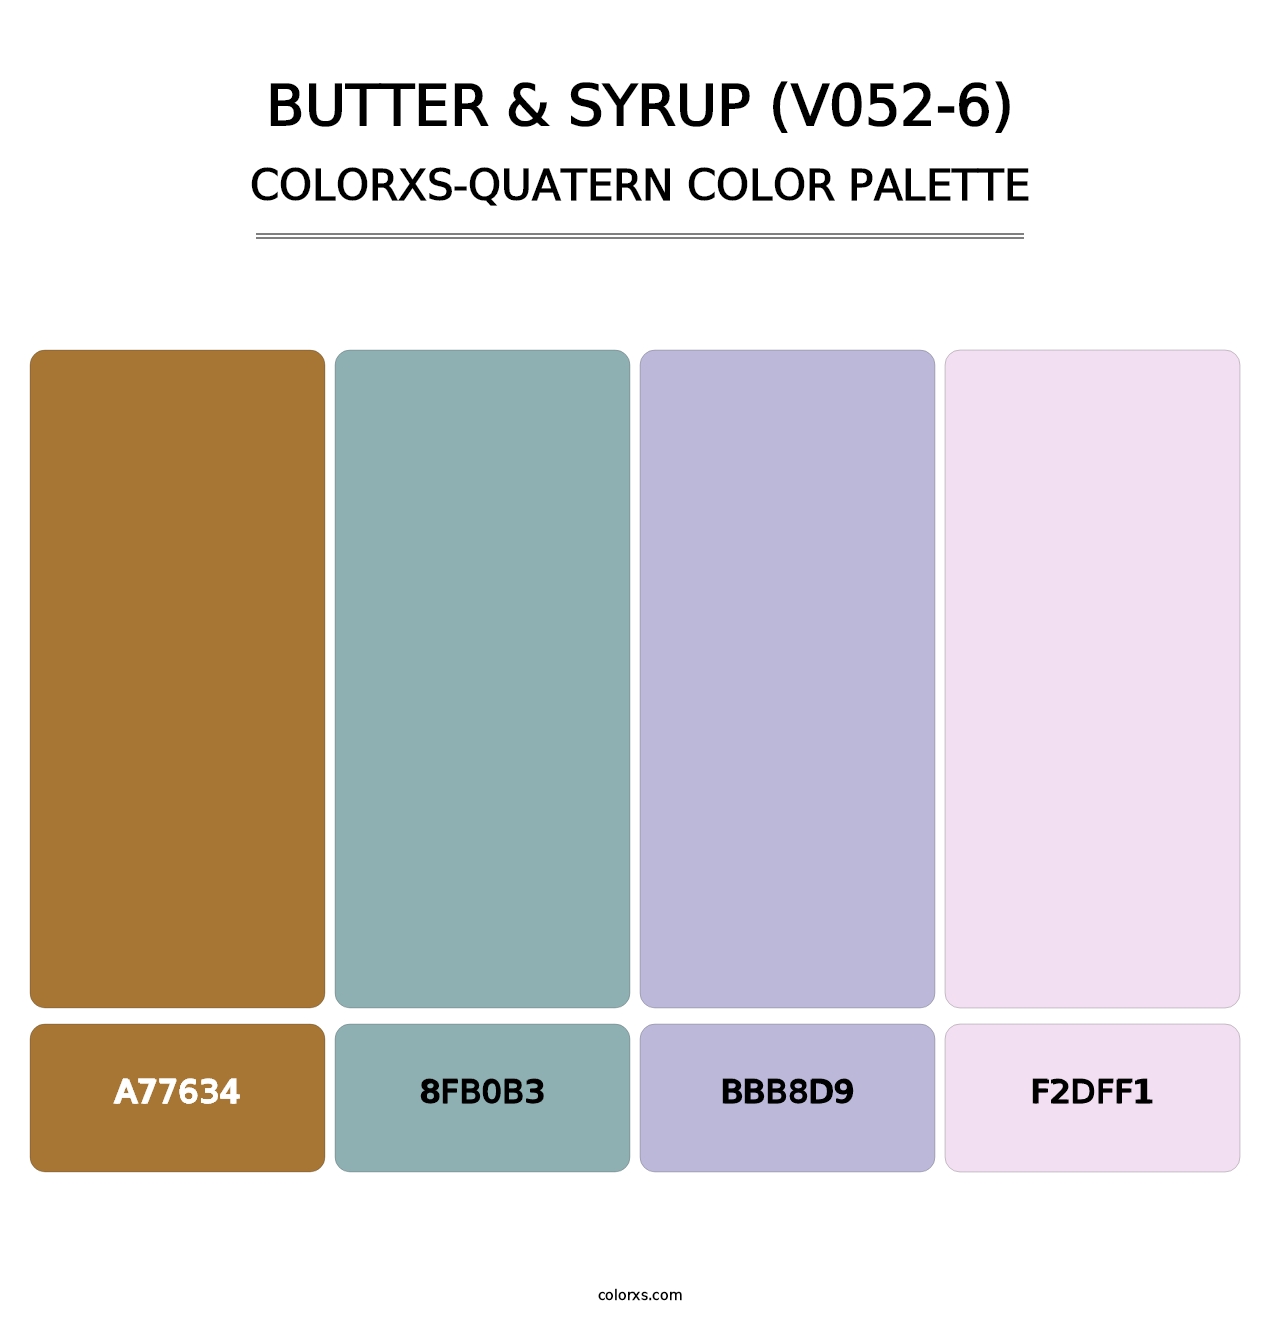 Butter & Syrup (V052-6) - Colorxs Quatern Palette